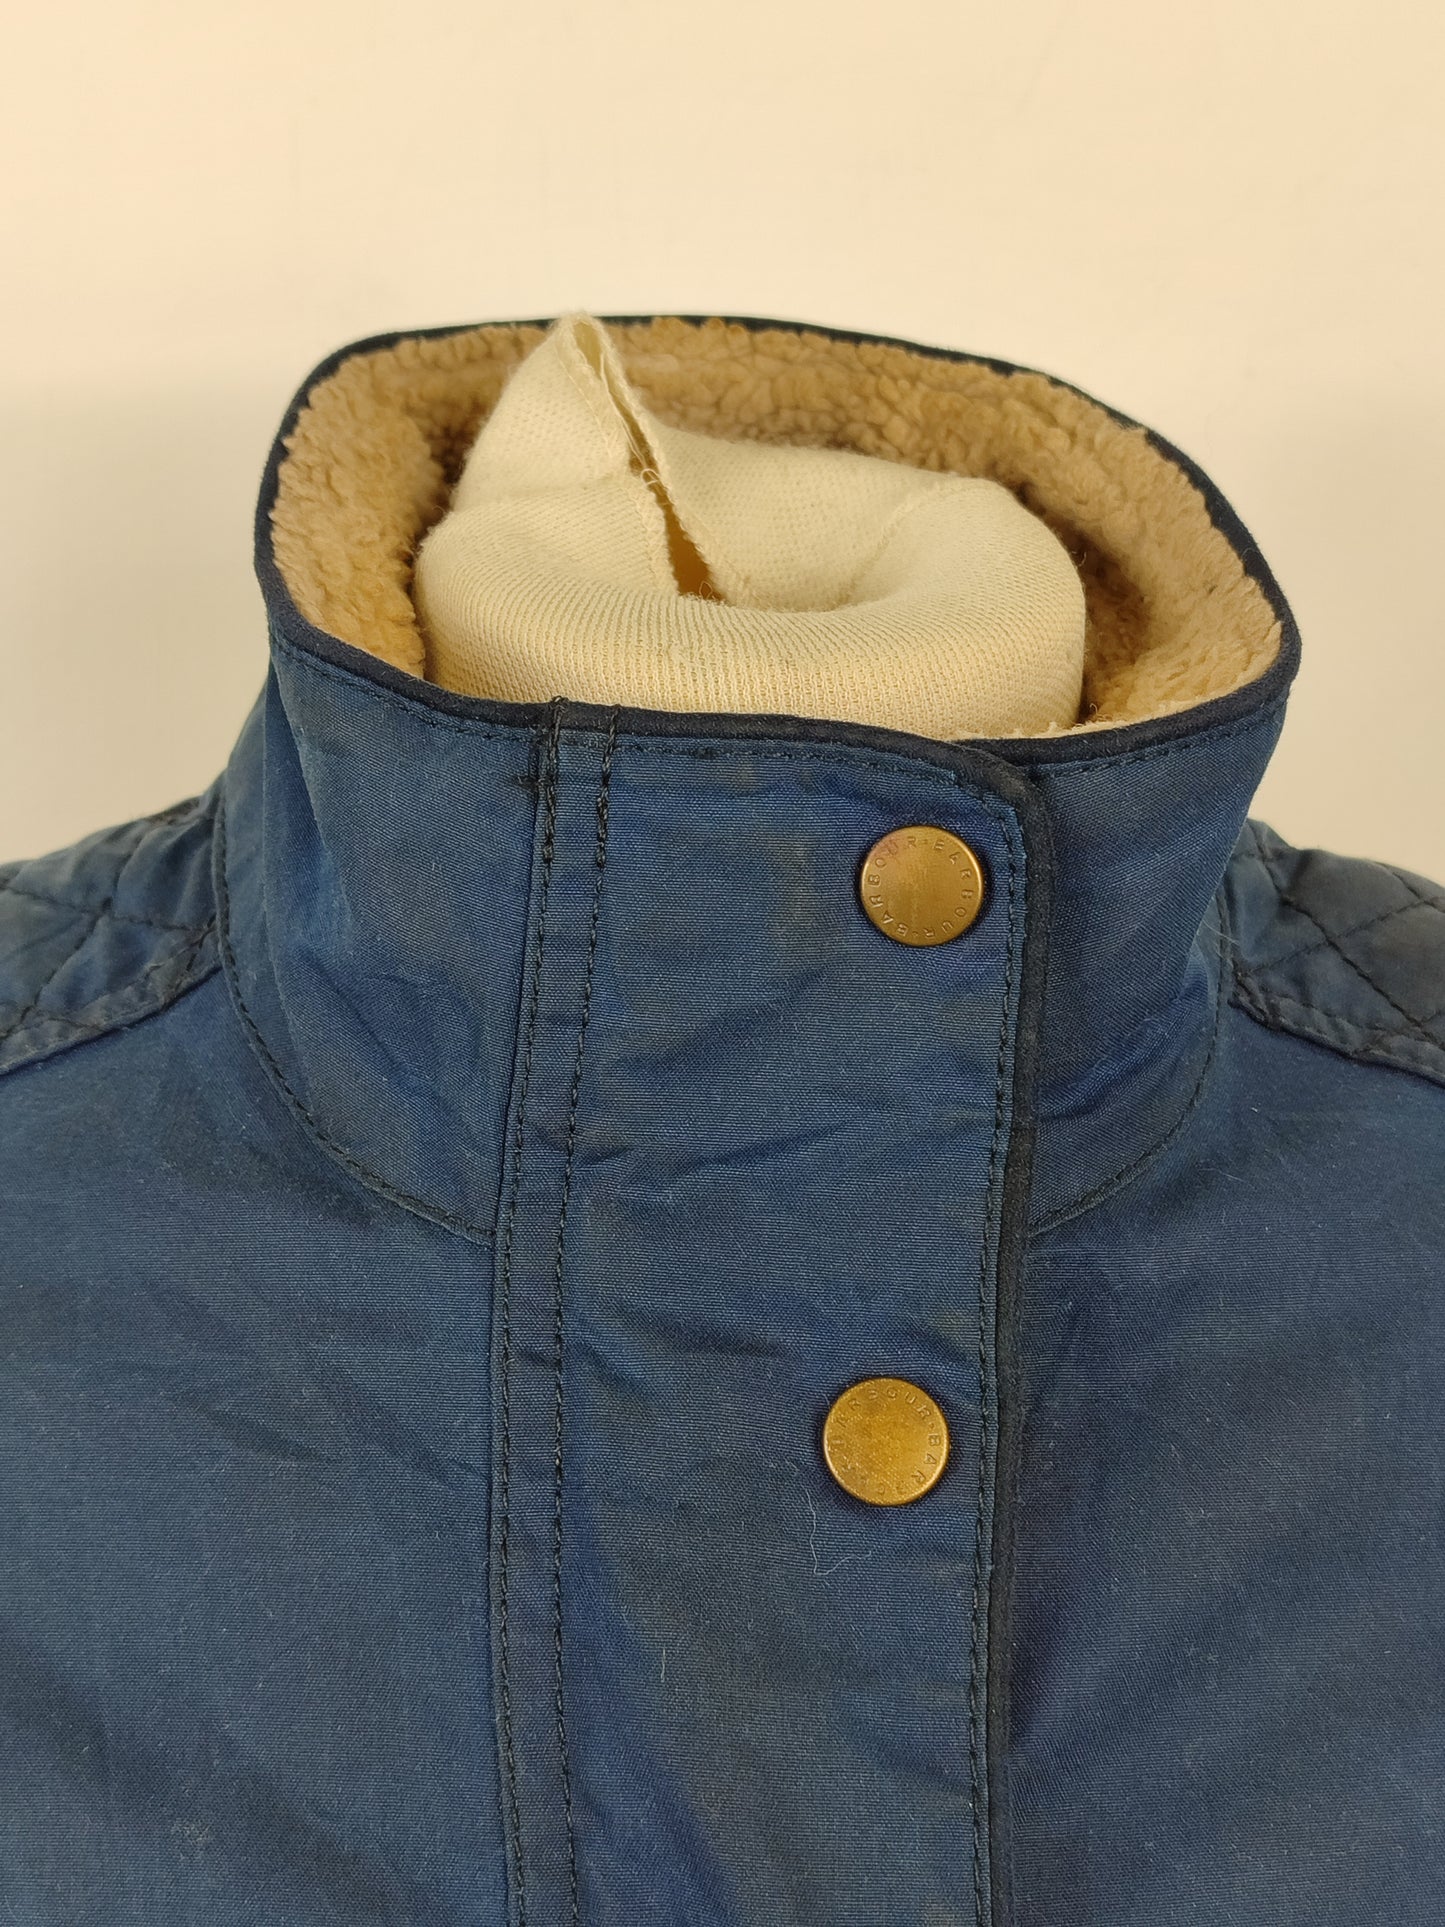 Giacca Barbour da donna invernale blu UK10 Small Blue Lady wax Brocklane jacket Small tg.40